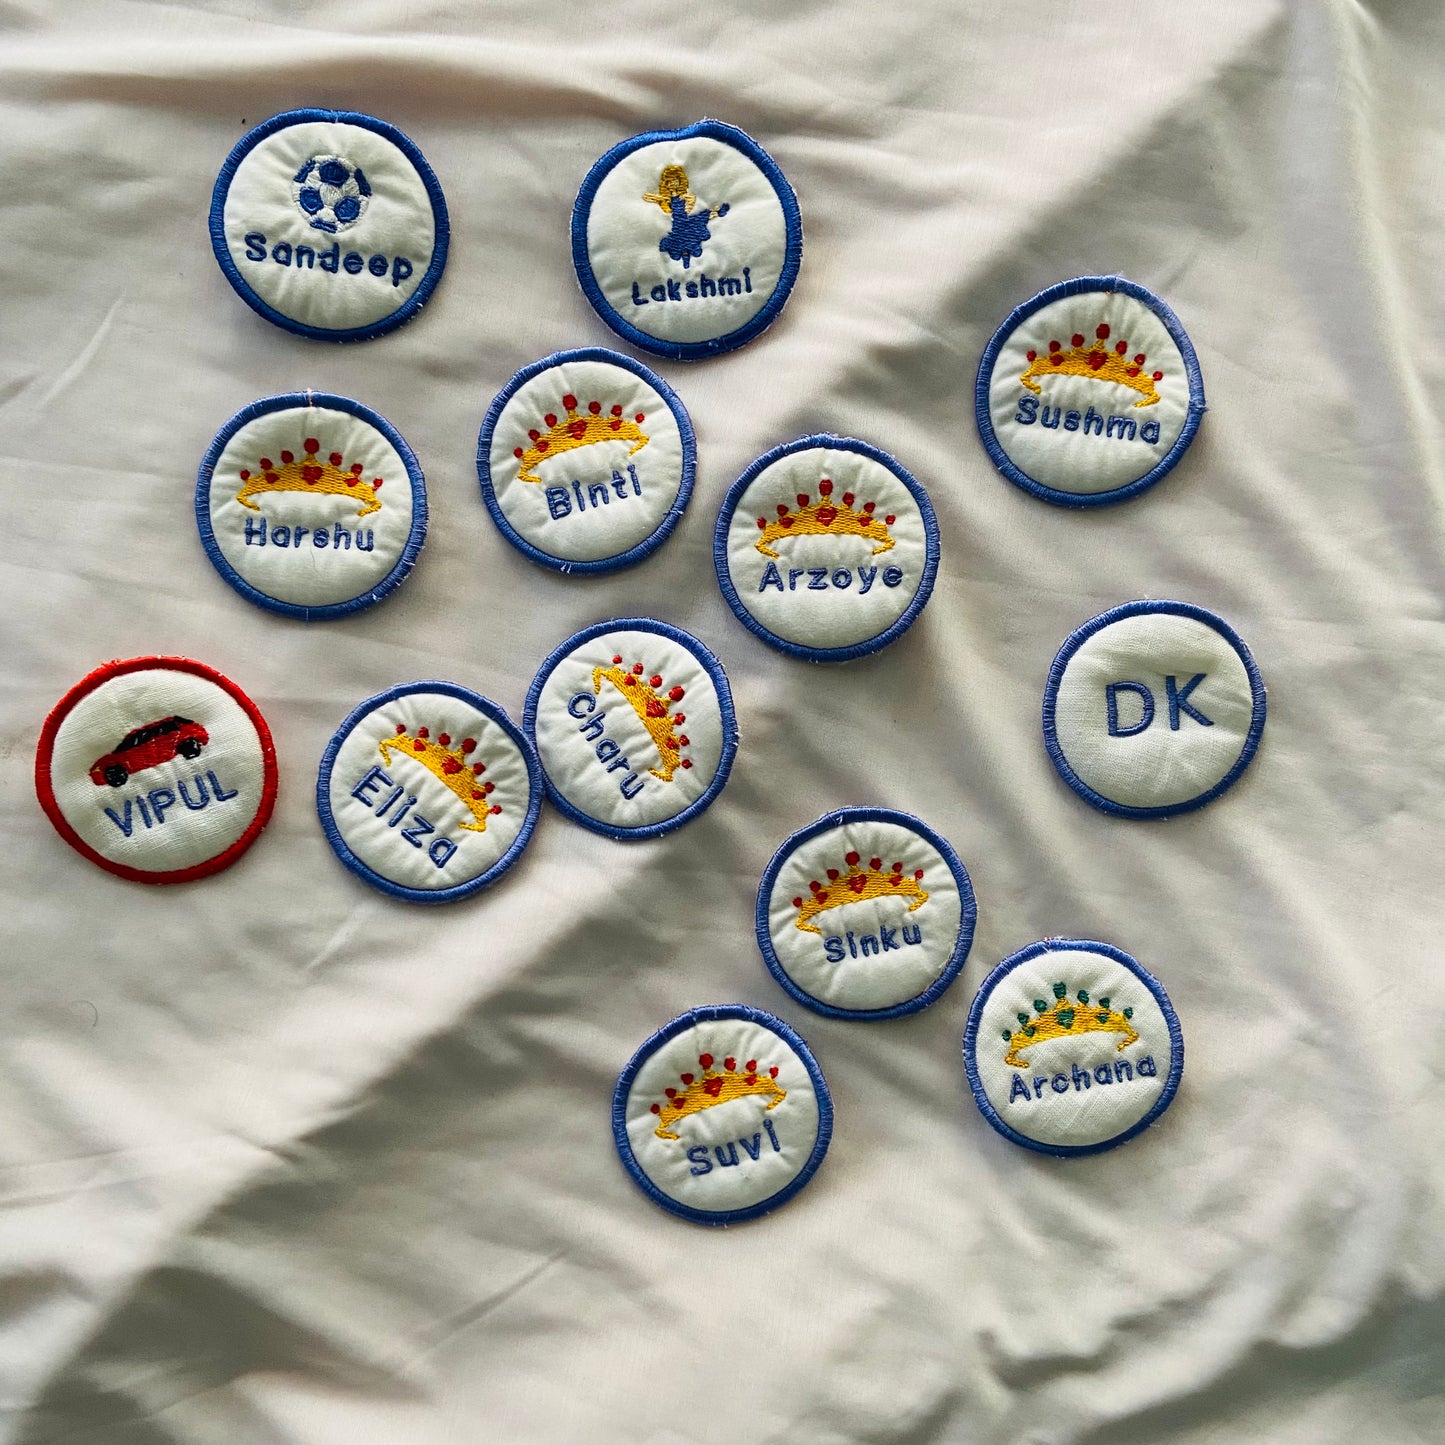 100% customised badge - Express yourself